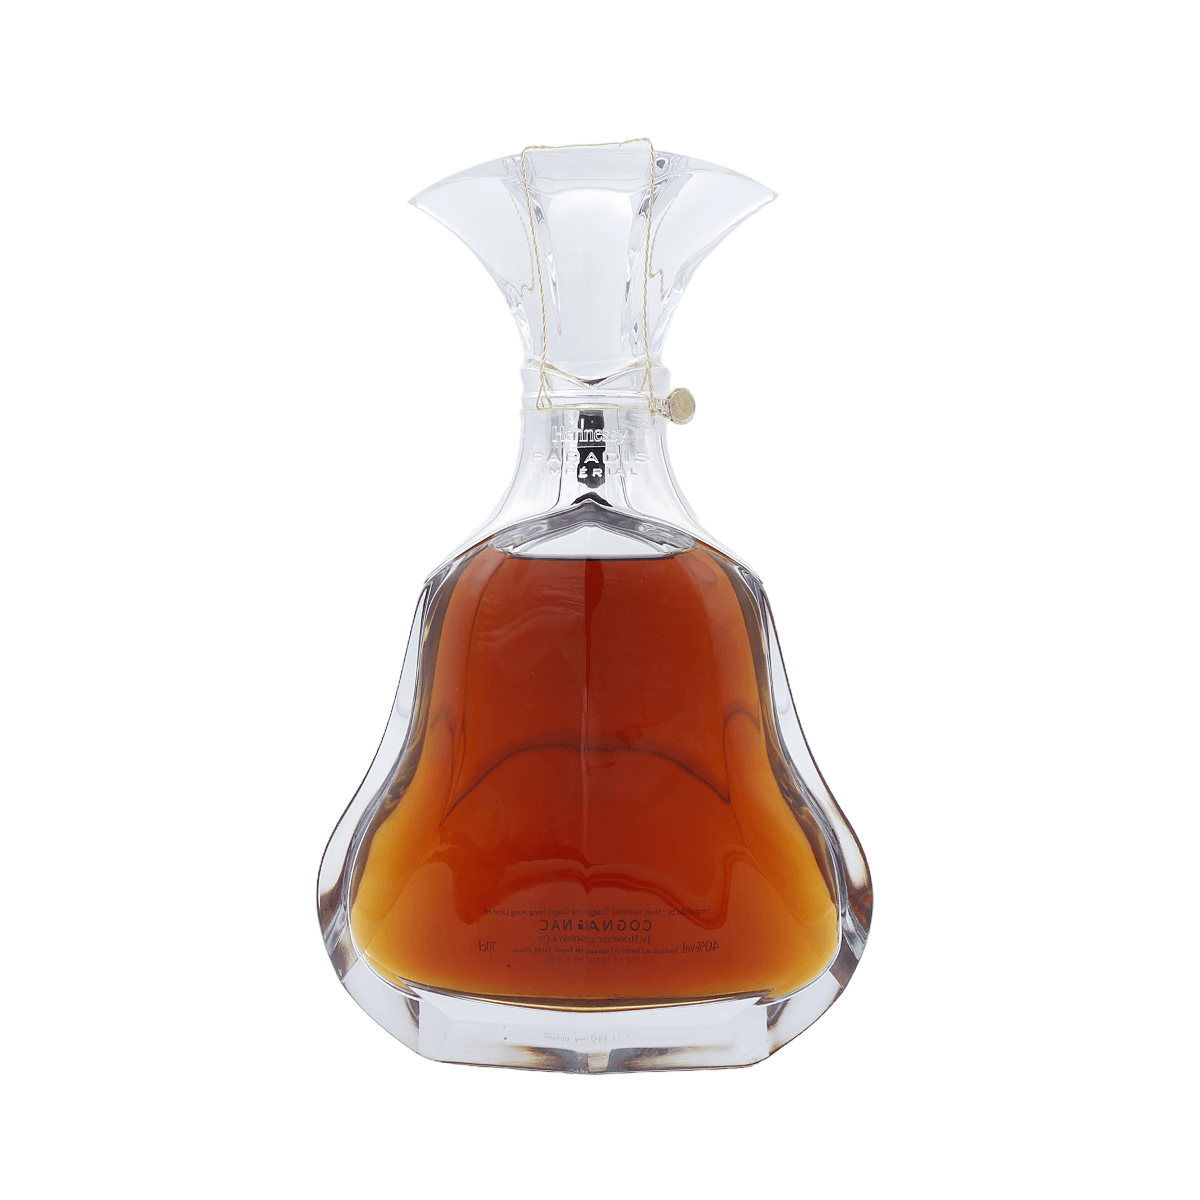 Hennessy Cognac Paradis Imperial, rare and precious bottle